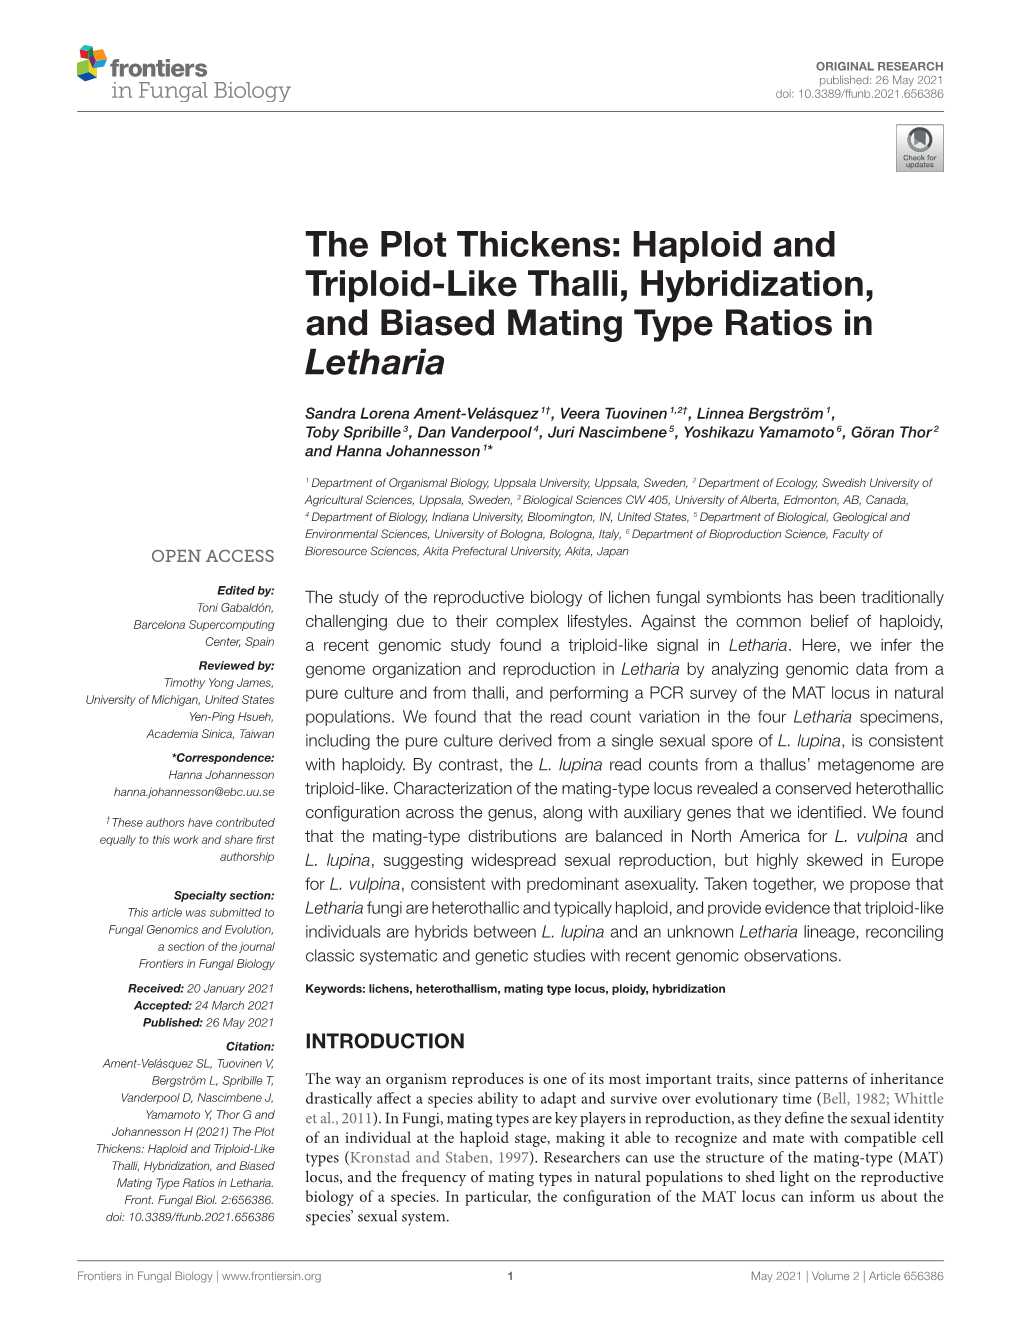 Haploid and Triploid-Like Thalli, Hybridization, and Biased Mating Type Ratios in Letharia